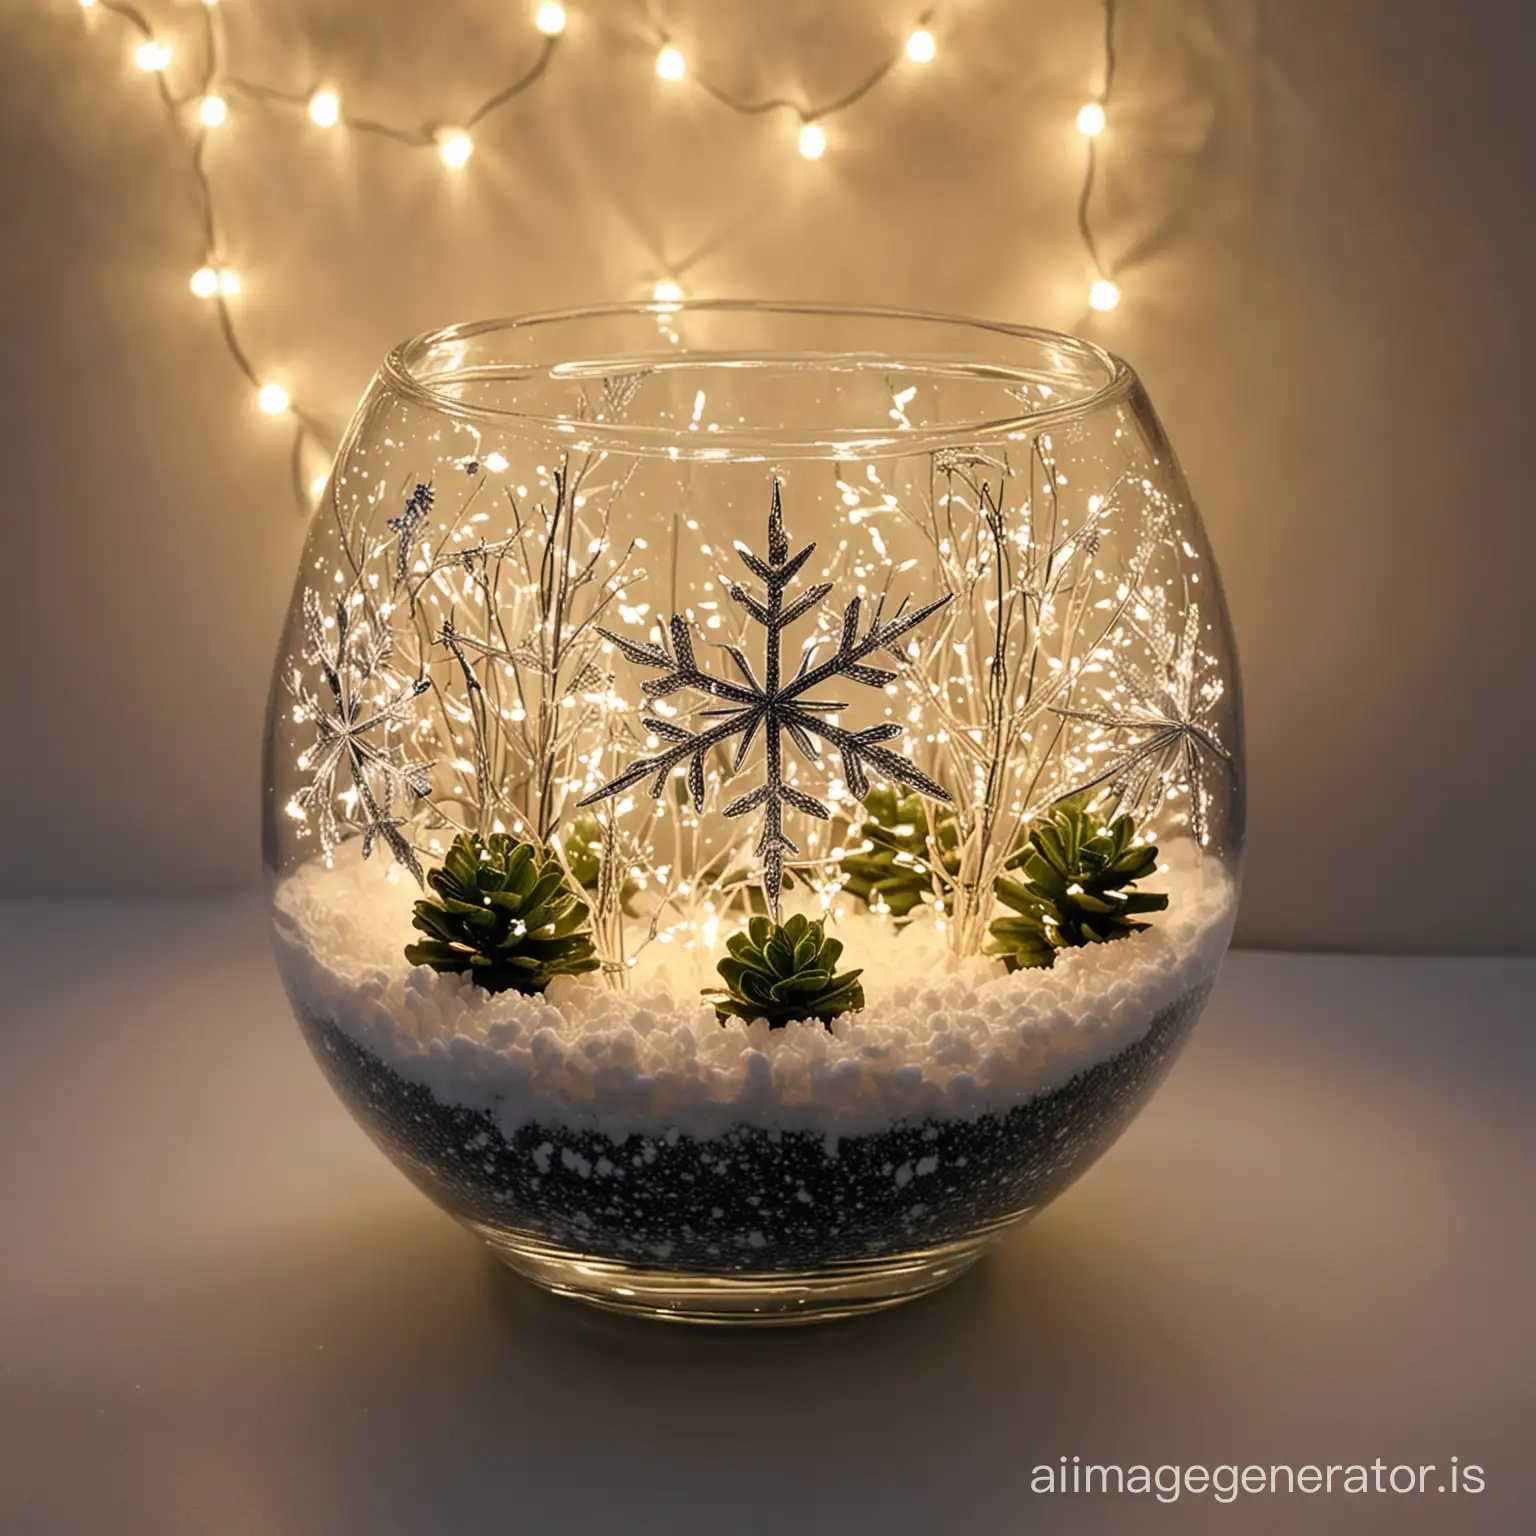 a glass round vase about 1/4 full with faux snow and an origami snowflake inside the bowl, glowing with fairy lights